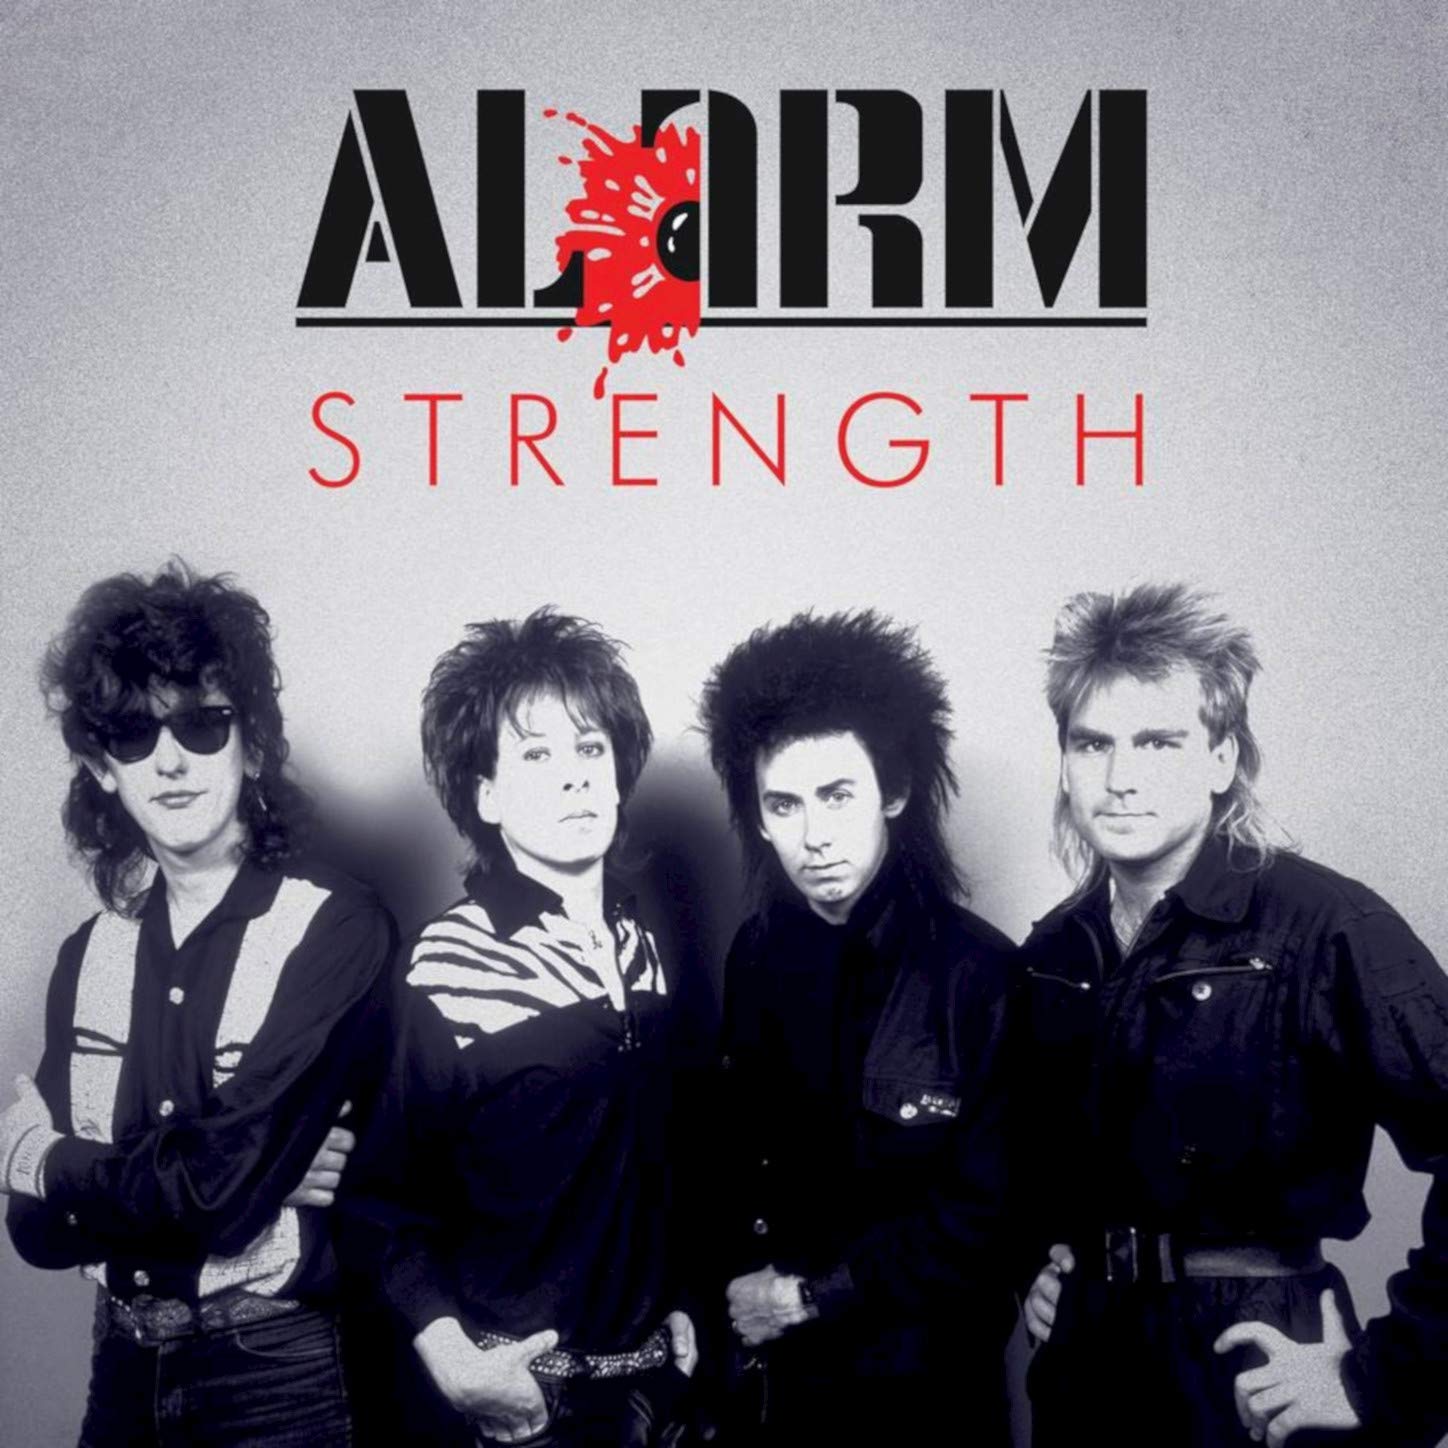 The Alarm-Strength 1985-1986-(21C105CD)-REMASTERED DELUXE EDITION-2CD-FLAC-2019-WRE